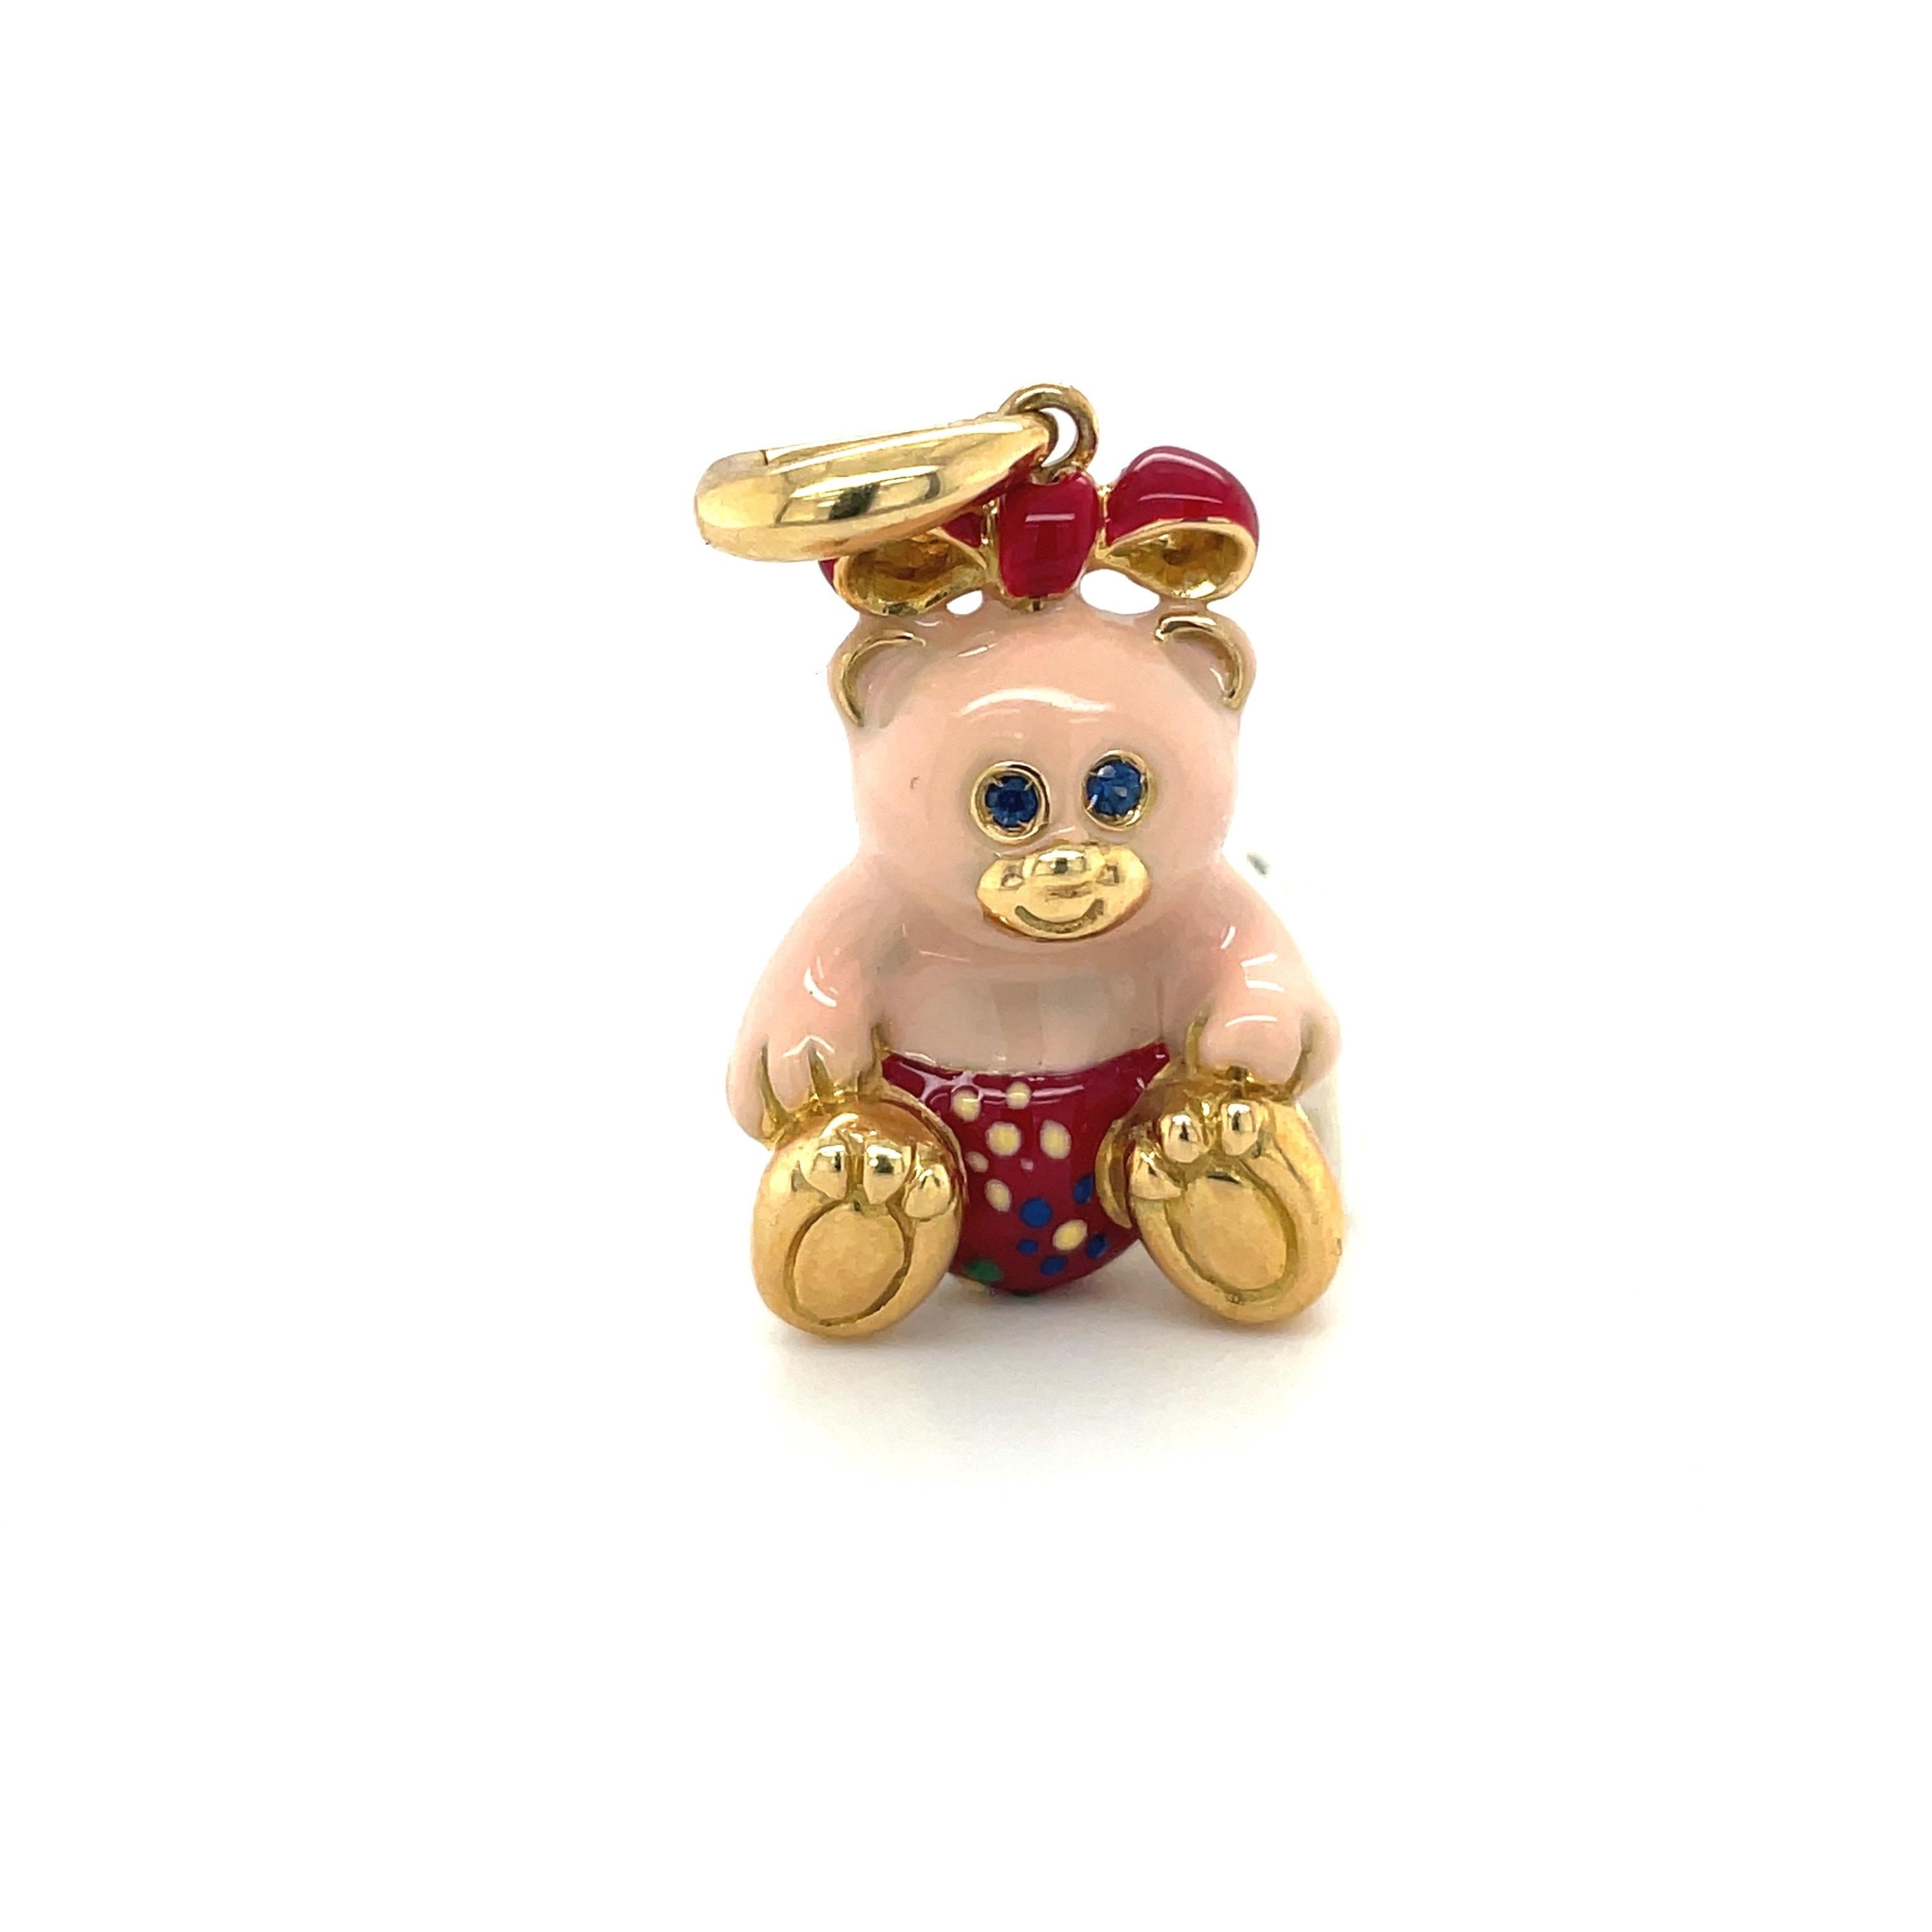 Just the cutest....Teddy bear charm made exclusively for Cellini by Ambrosi of Italy.

This 18 karat yellow gold teddy bear charm is crafted with pink enamel for the body. Her outfit is red with yellow, blue, and green flowers. She has a red bow and